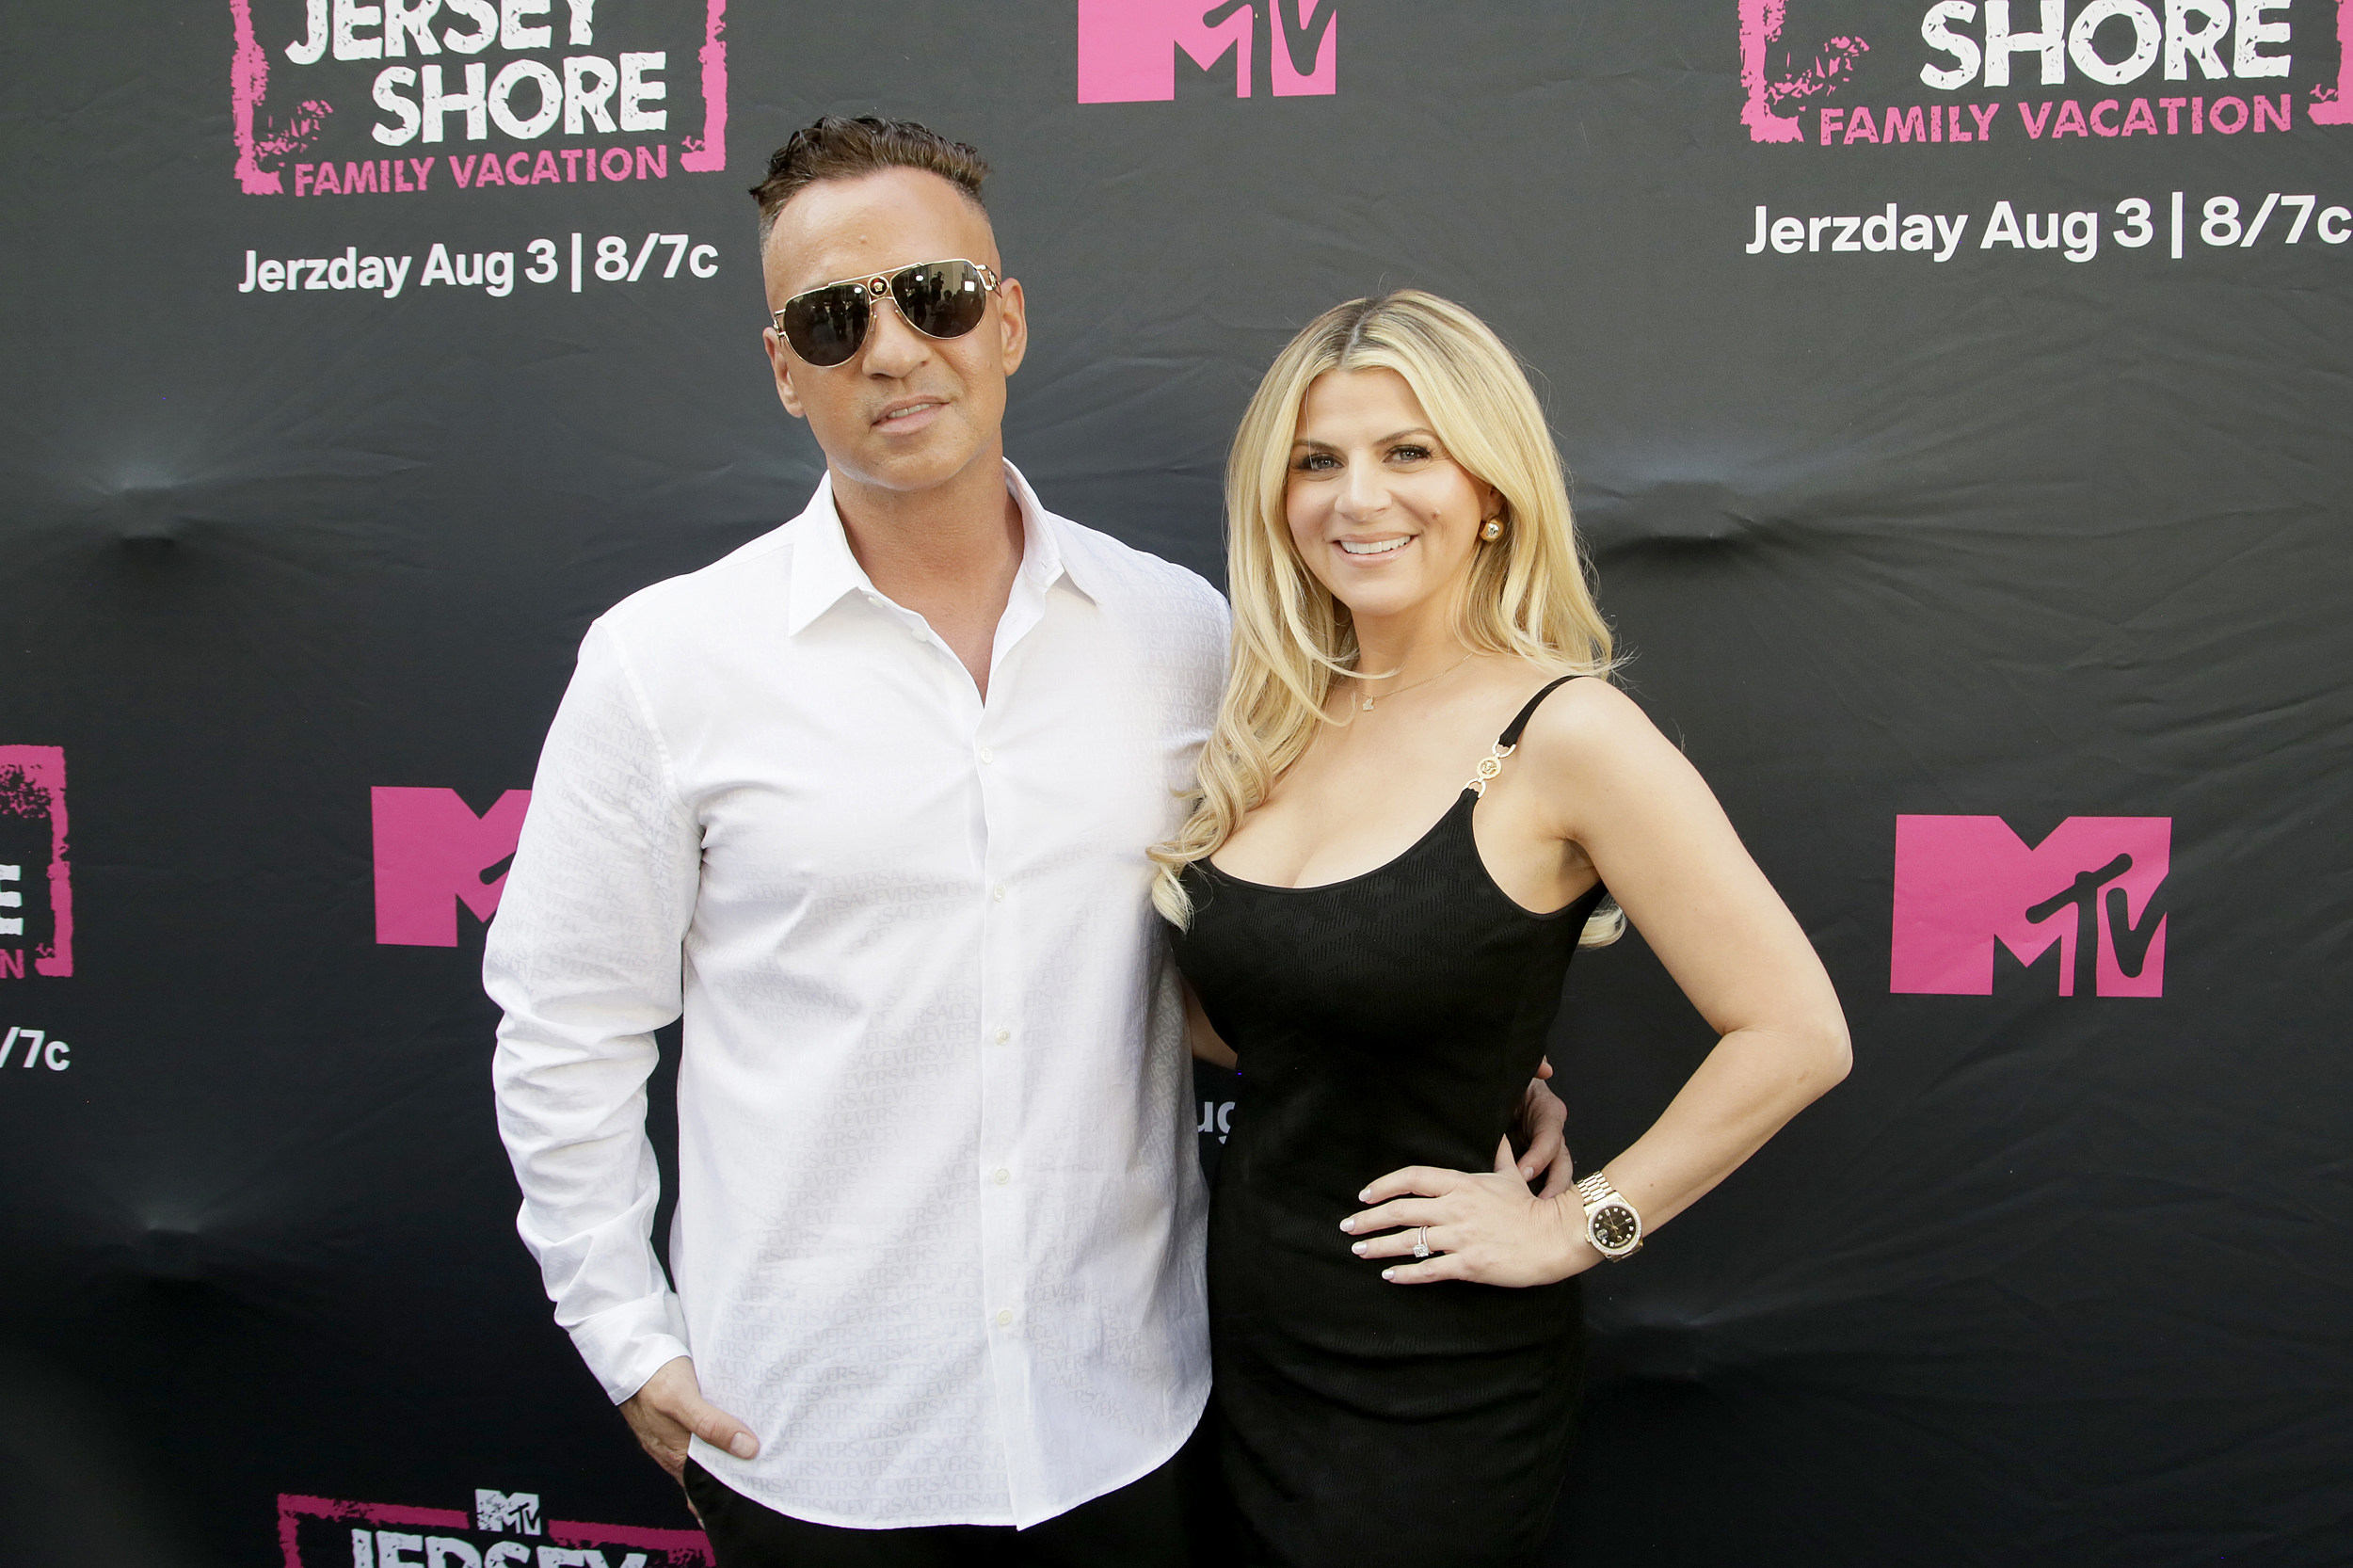 MTV's Jersey Shore Family Vacation NYC Premiere Party